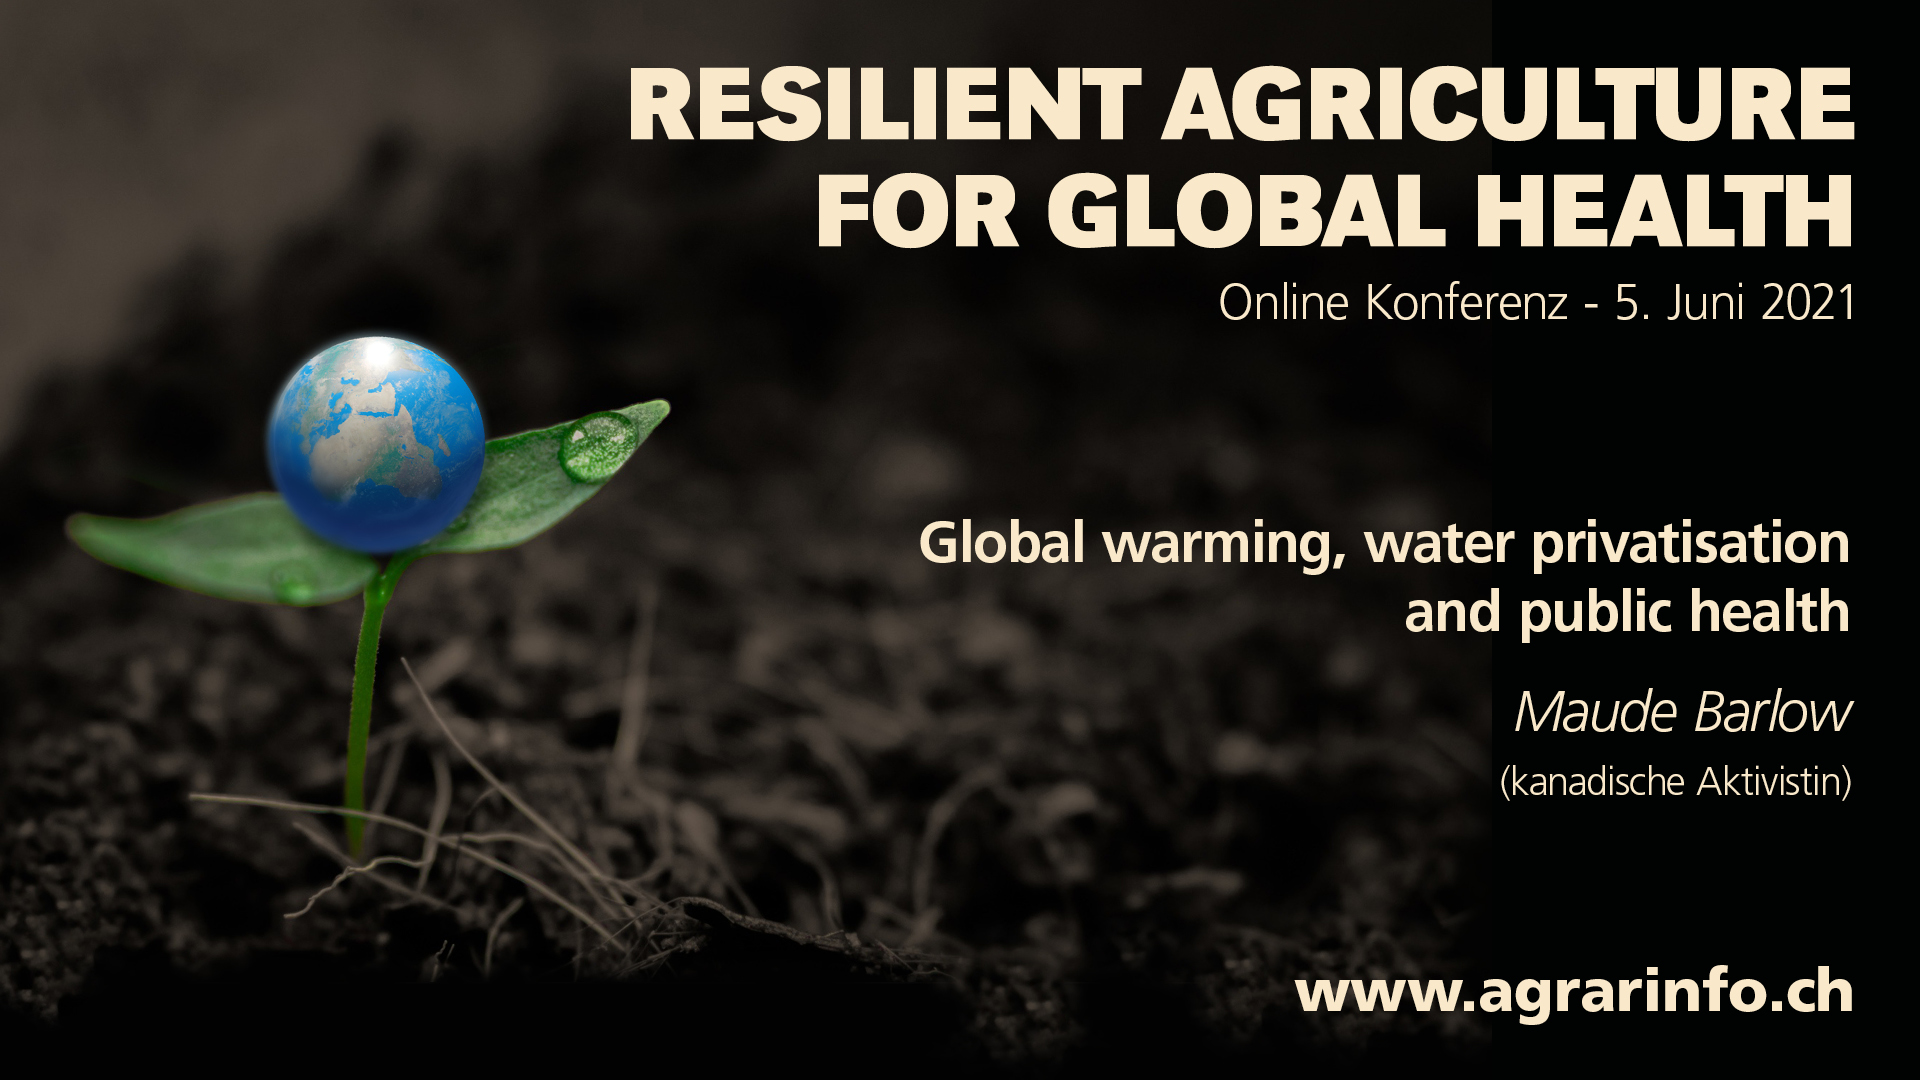 Resilient agriculture for global health